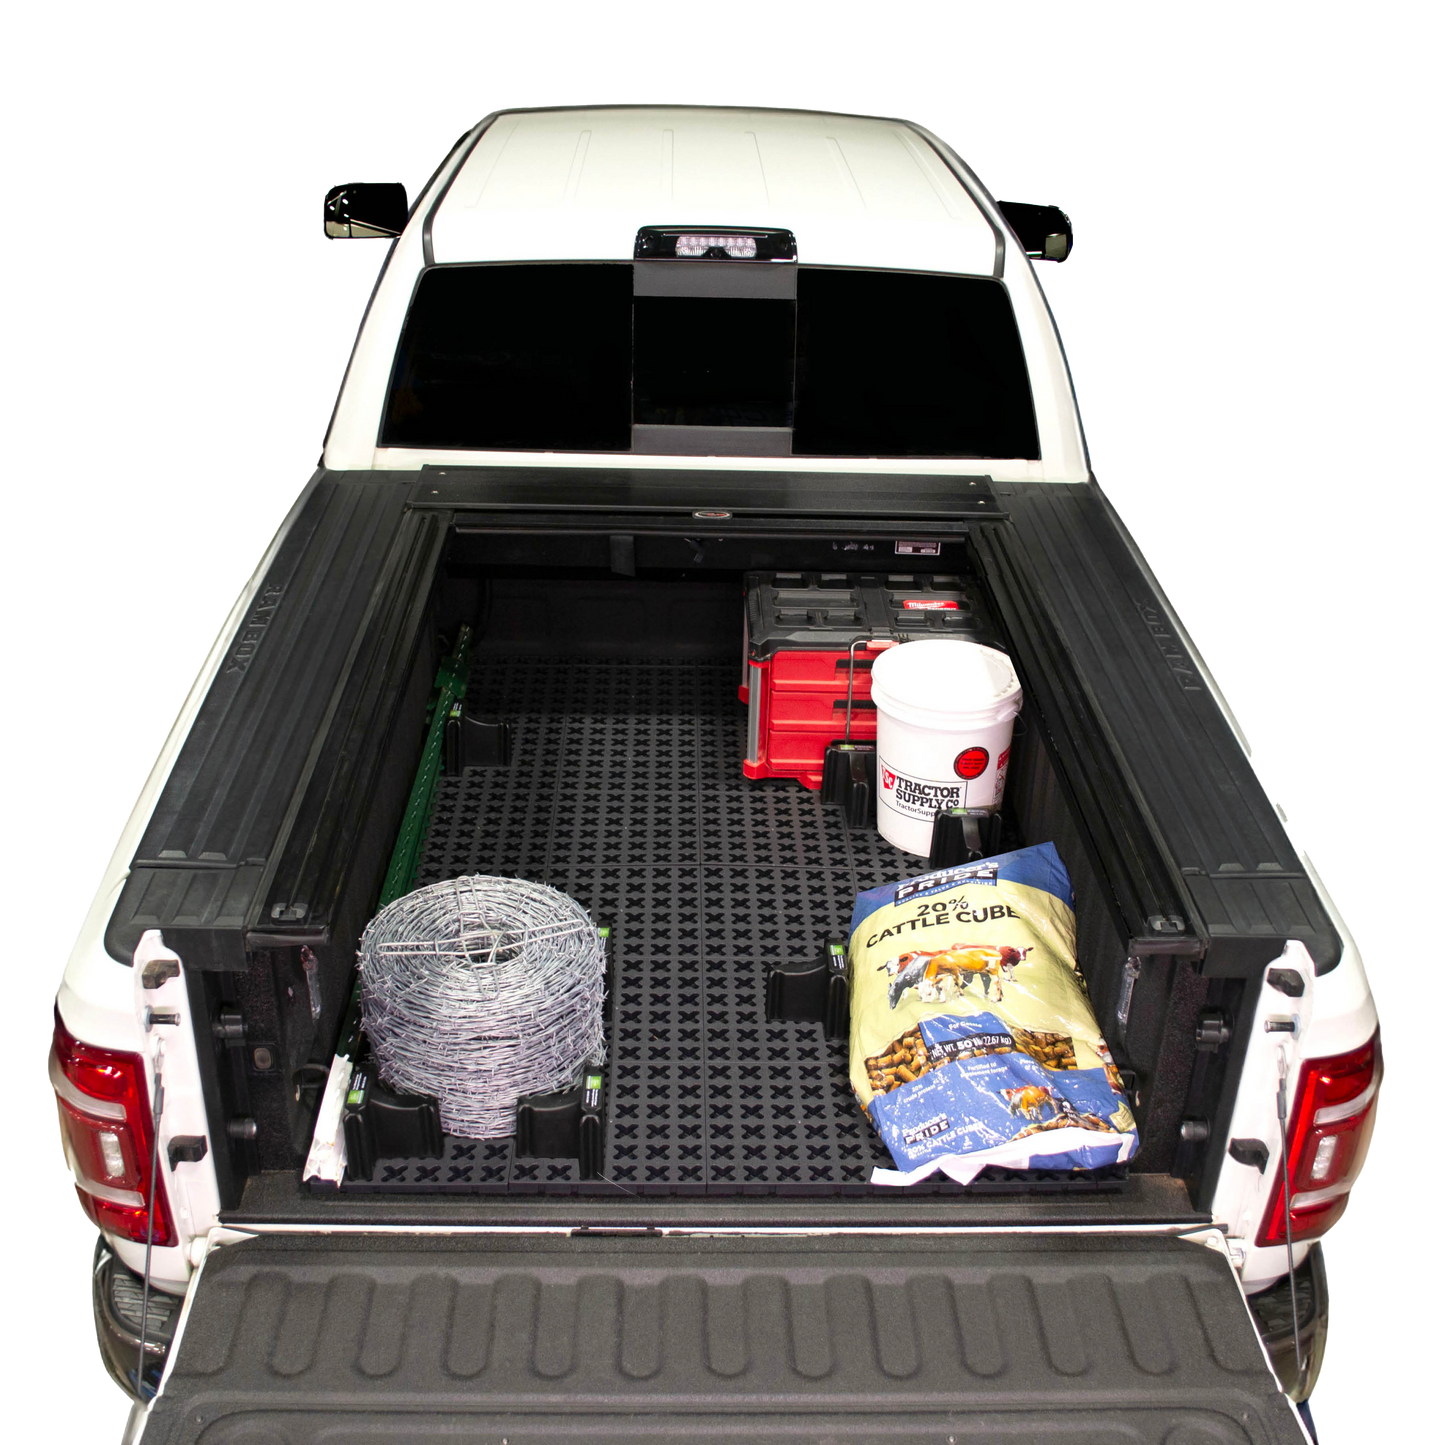 Tmat Cargo System in a Ram pickup bed with a bucket, t-posts, barb wire, and Milwaukee Packout toolbox.